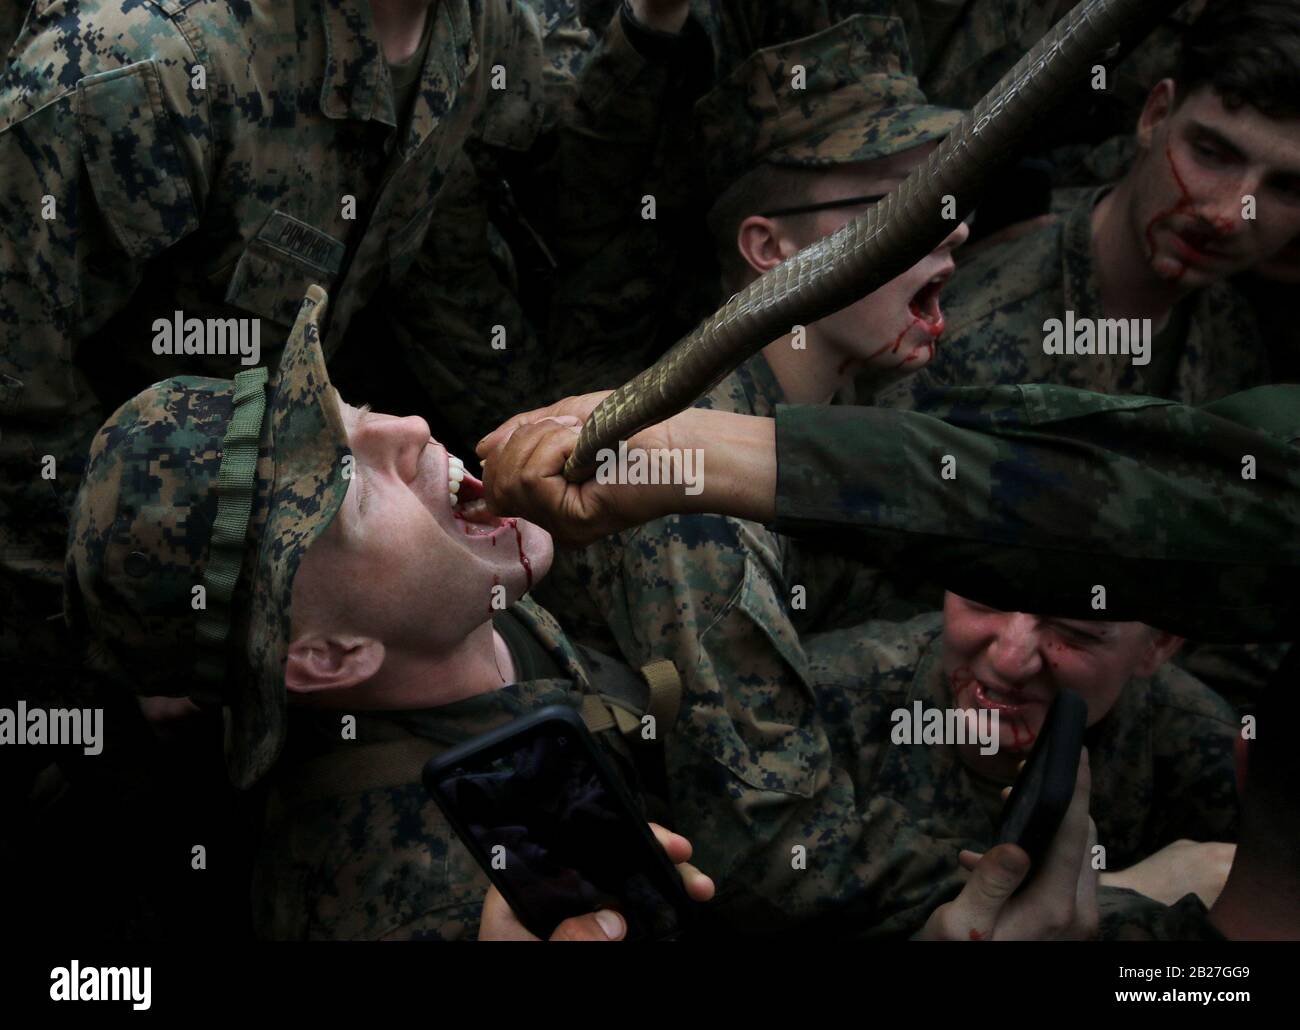 Chanthaburi, Thailand. 1st Mar, 2020. US Marines drink cobra's blood offered by a Thai Navy during a jungle survival training as part of the military exercise Cobra Gold 2020 at a Navy base in Chanthaburi province. March 01, 2020. The 39th annual Cobra Gold military exercise is an event held between the Thai and US armed forces every year. It's the largest Asia-Pacific military exercise held each year, and is among the largest multinational military exercises in which the US participates. Credit: Urdee Image/ZUMA Wire/Alamy Live News Stock Photo